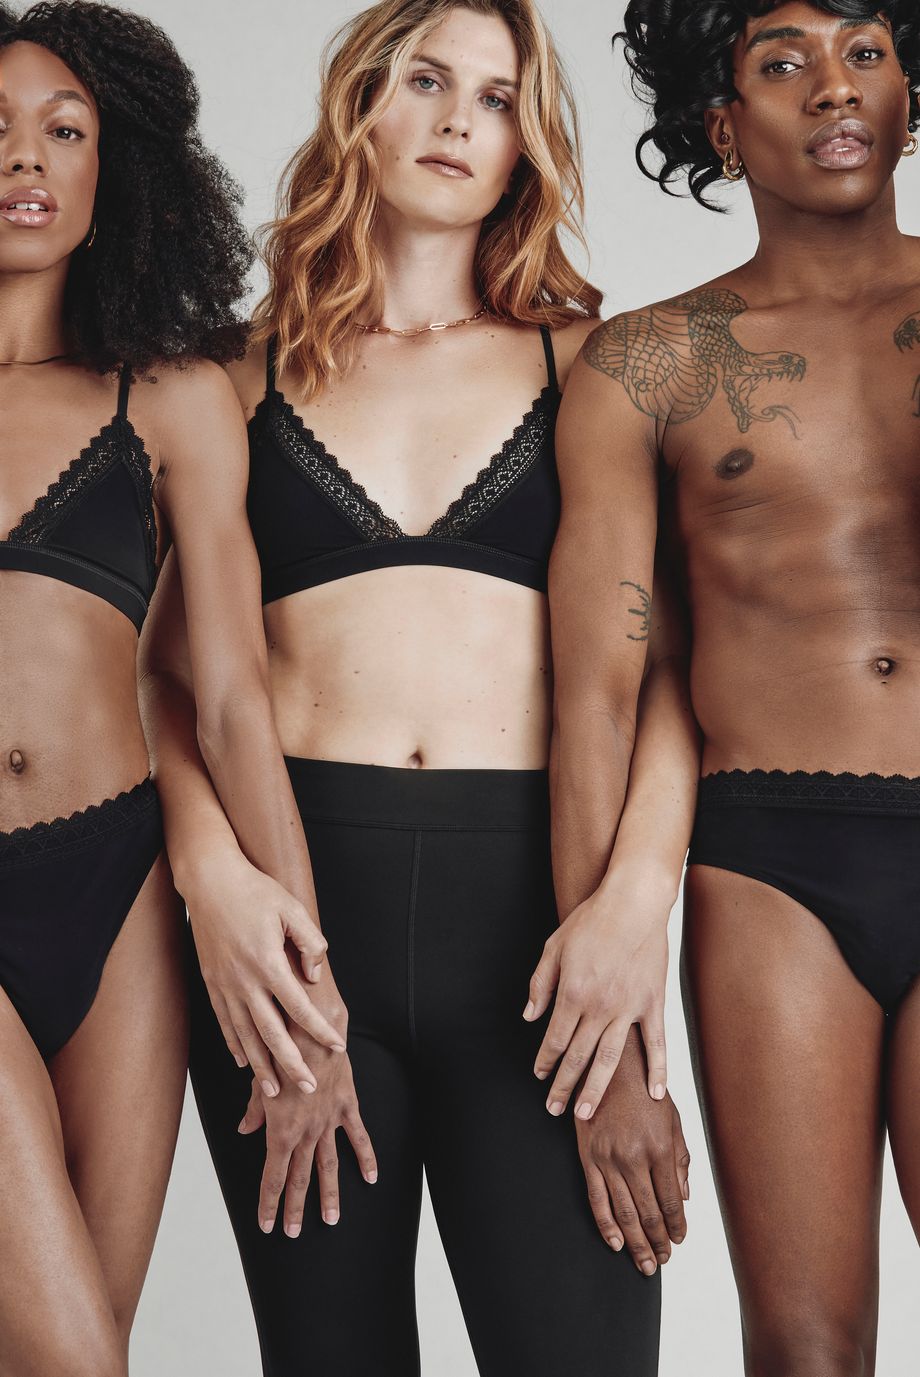 Women's Boxers and Other Gender-Affirming Underwear to Know About